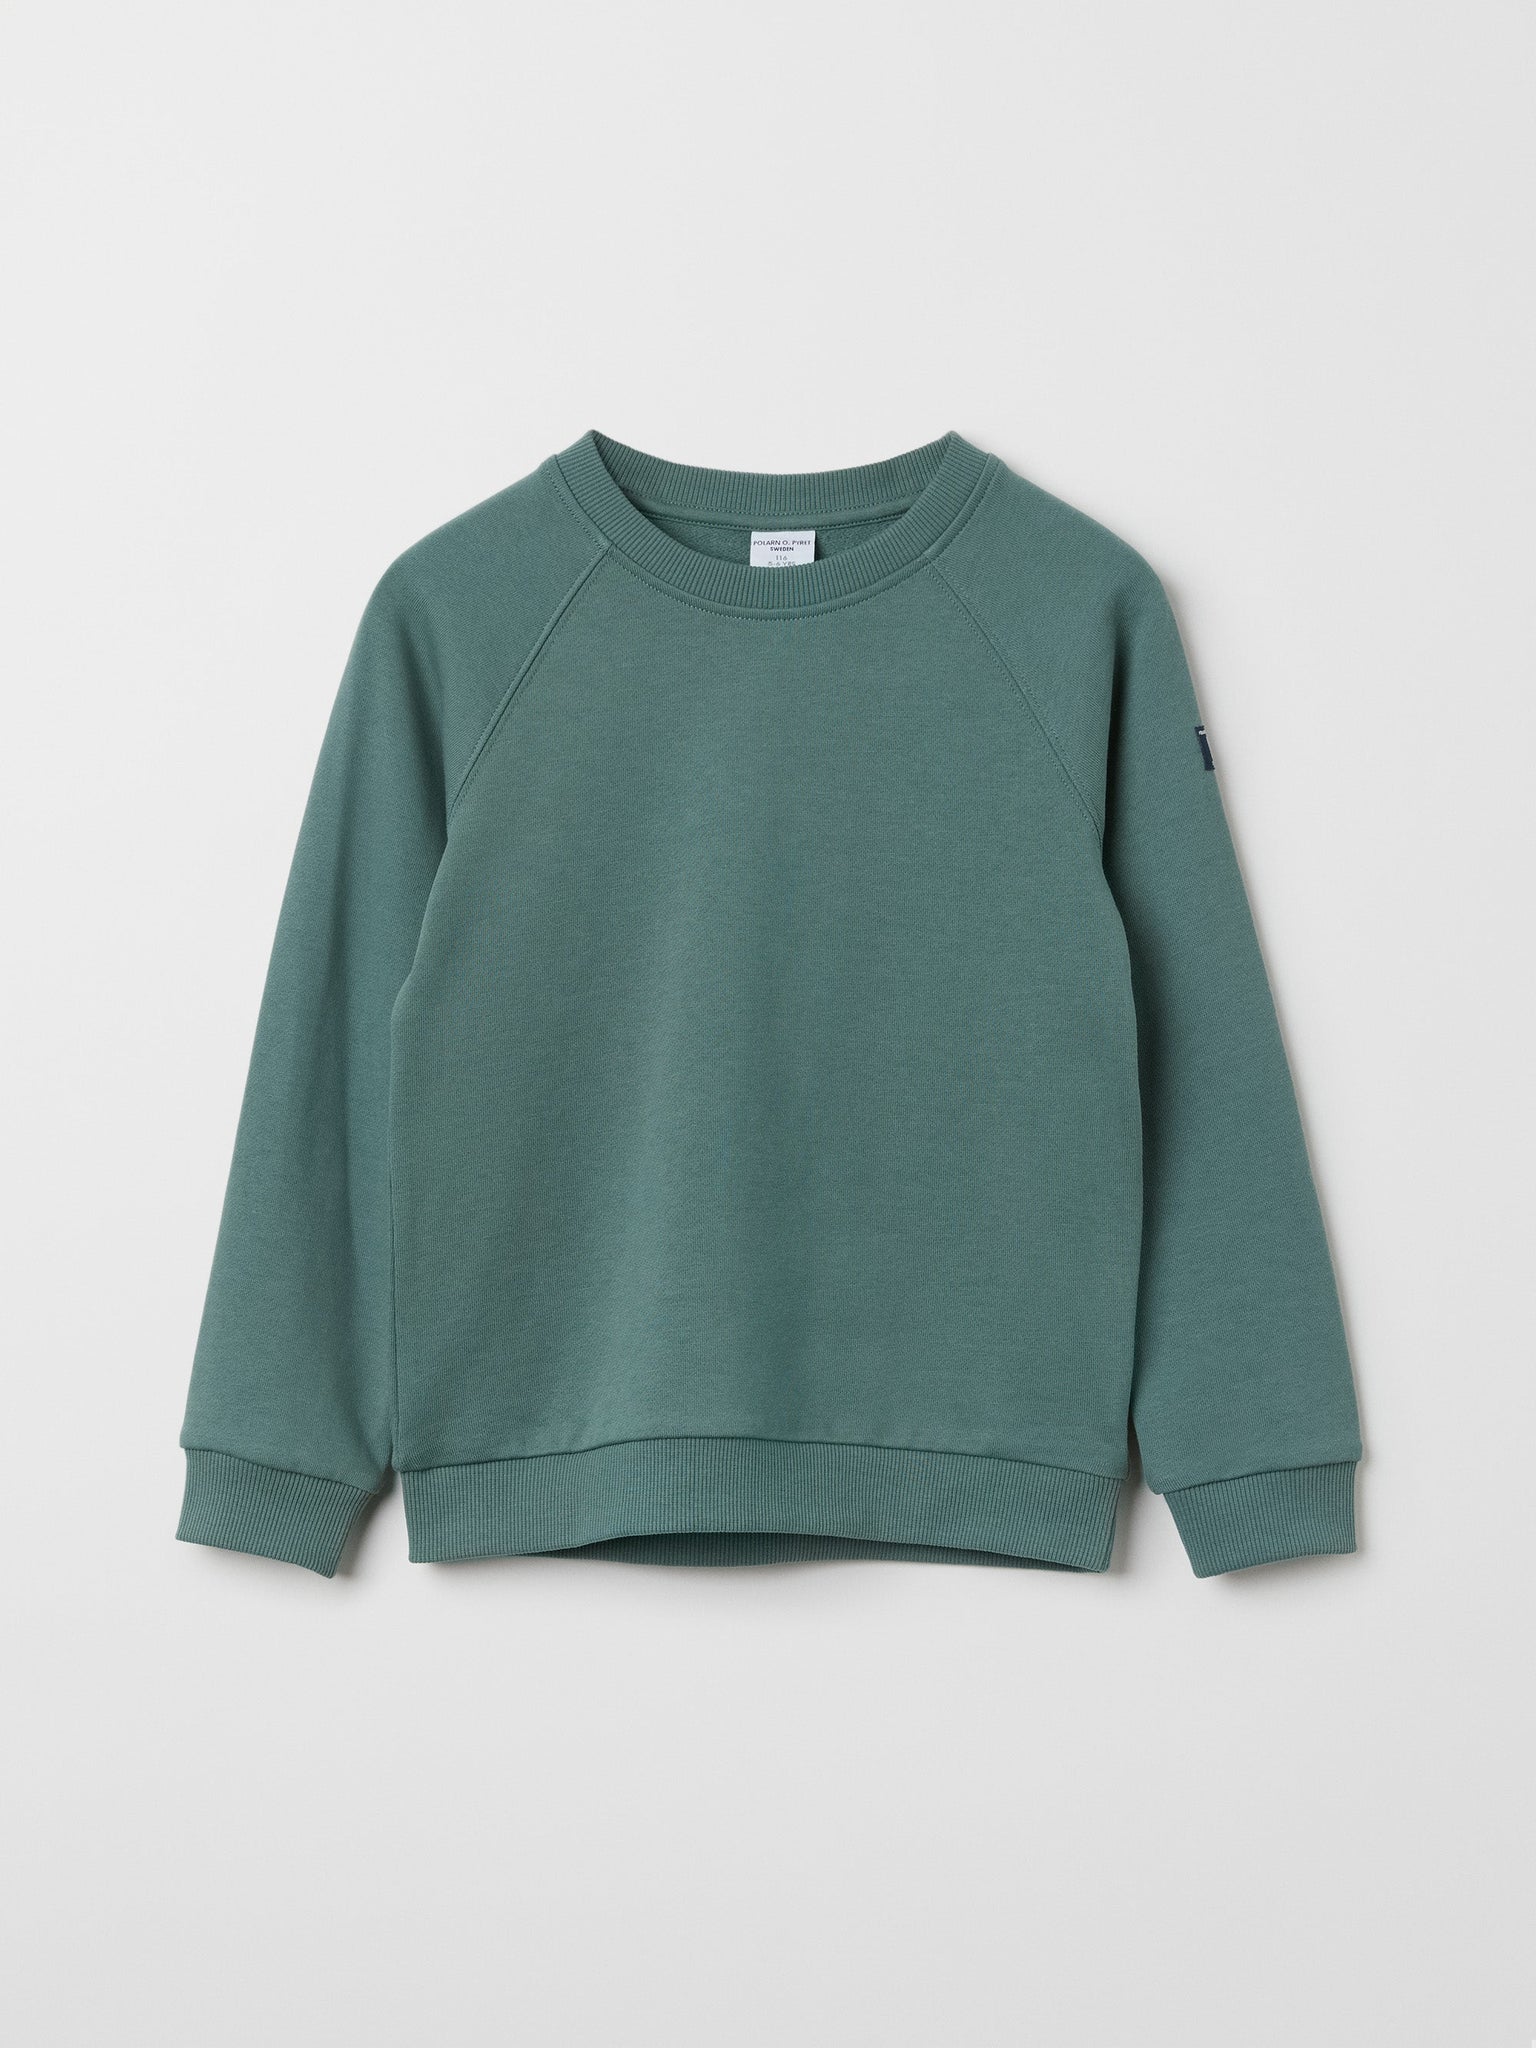 Organic Cotton Green Kids Sweatshirt from the Polarn O. Pyret kidswear collection. The best ethical kids clothes